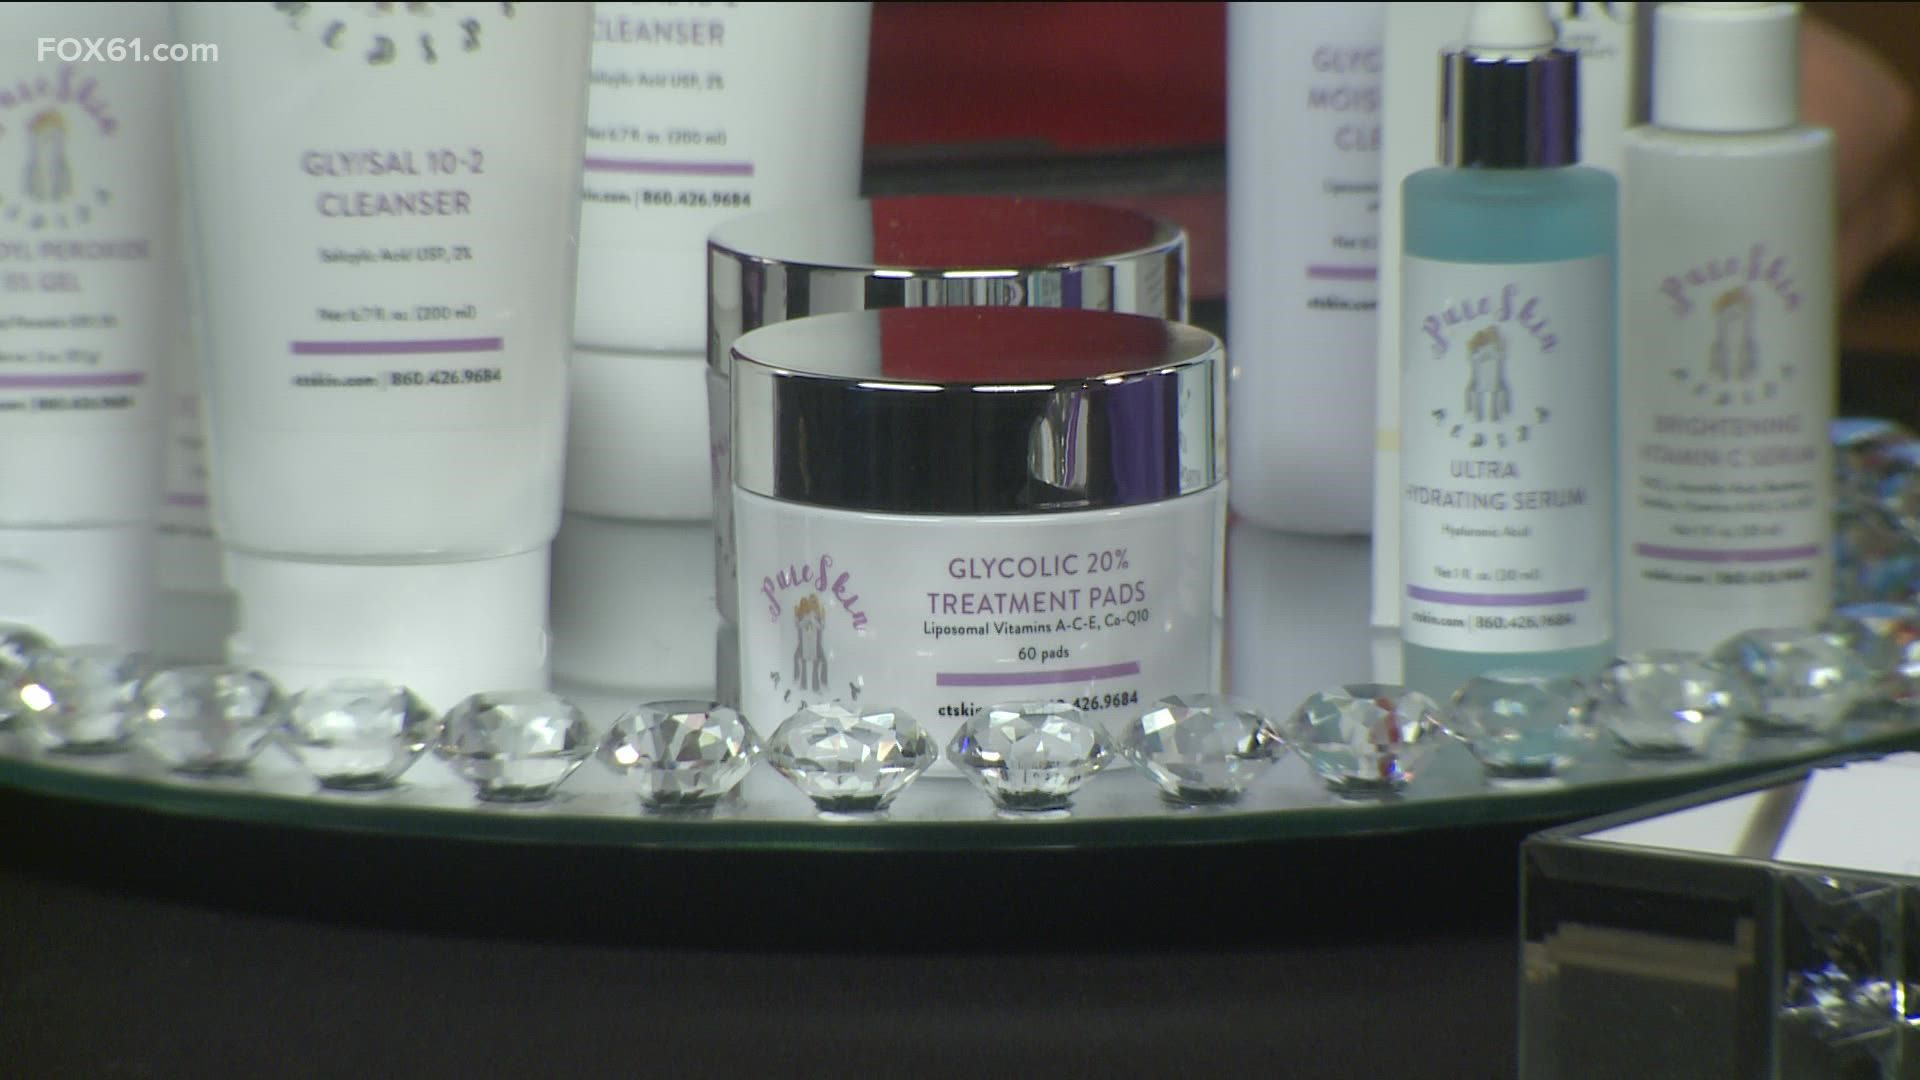 Michelle Evans, a medical esthetician with Pure Skin MedSpa, discusses what products are best for combating acne and keeping skin healthy.